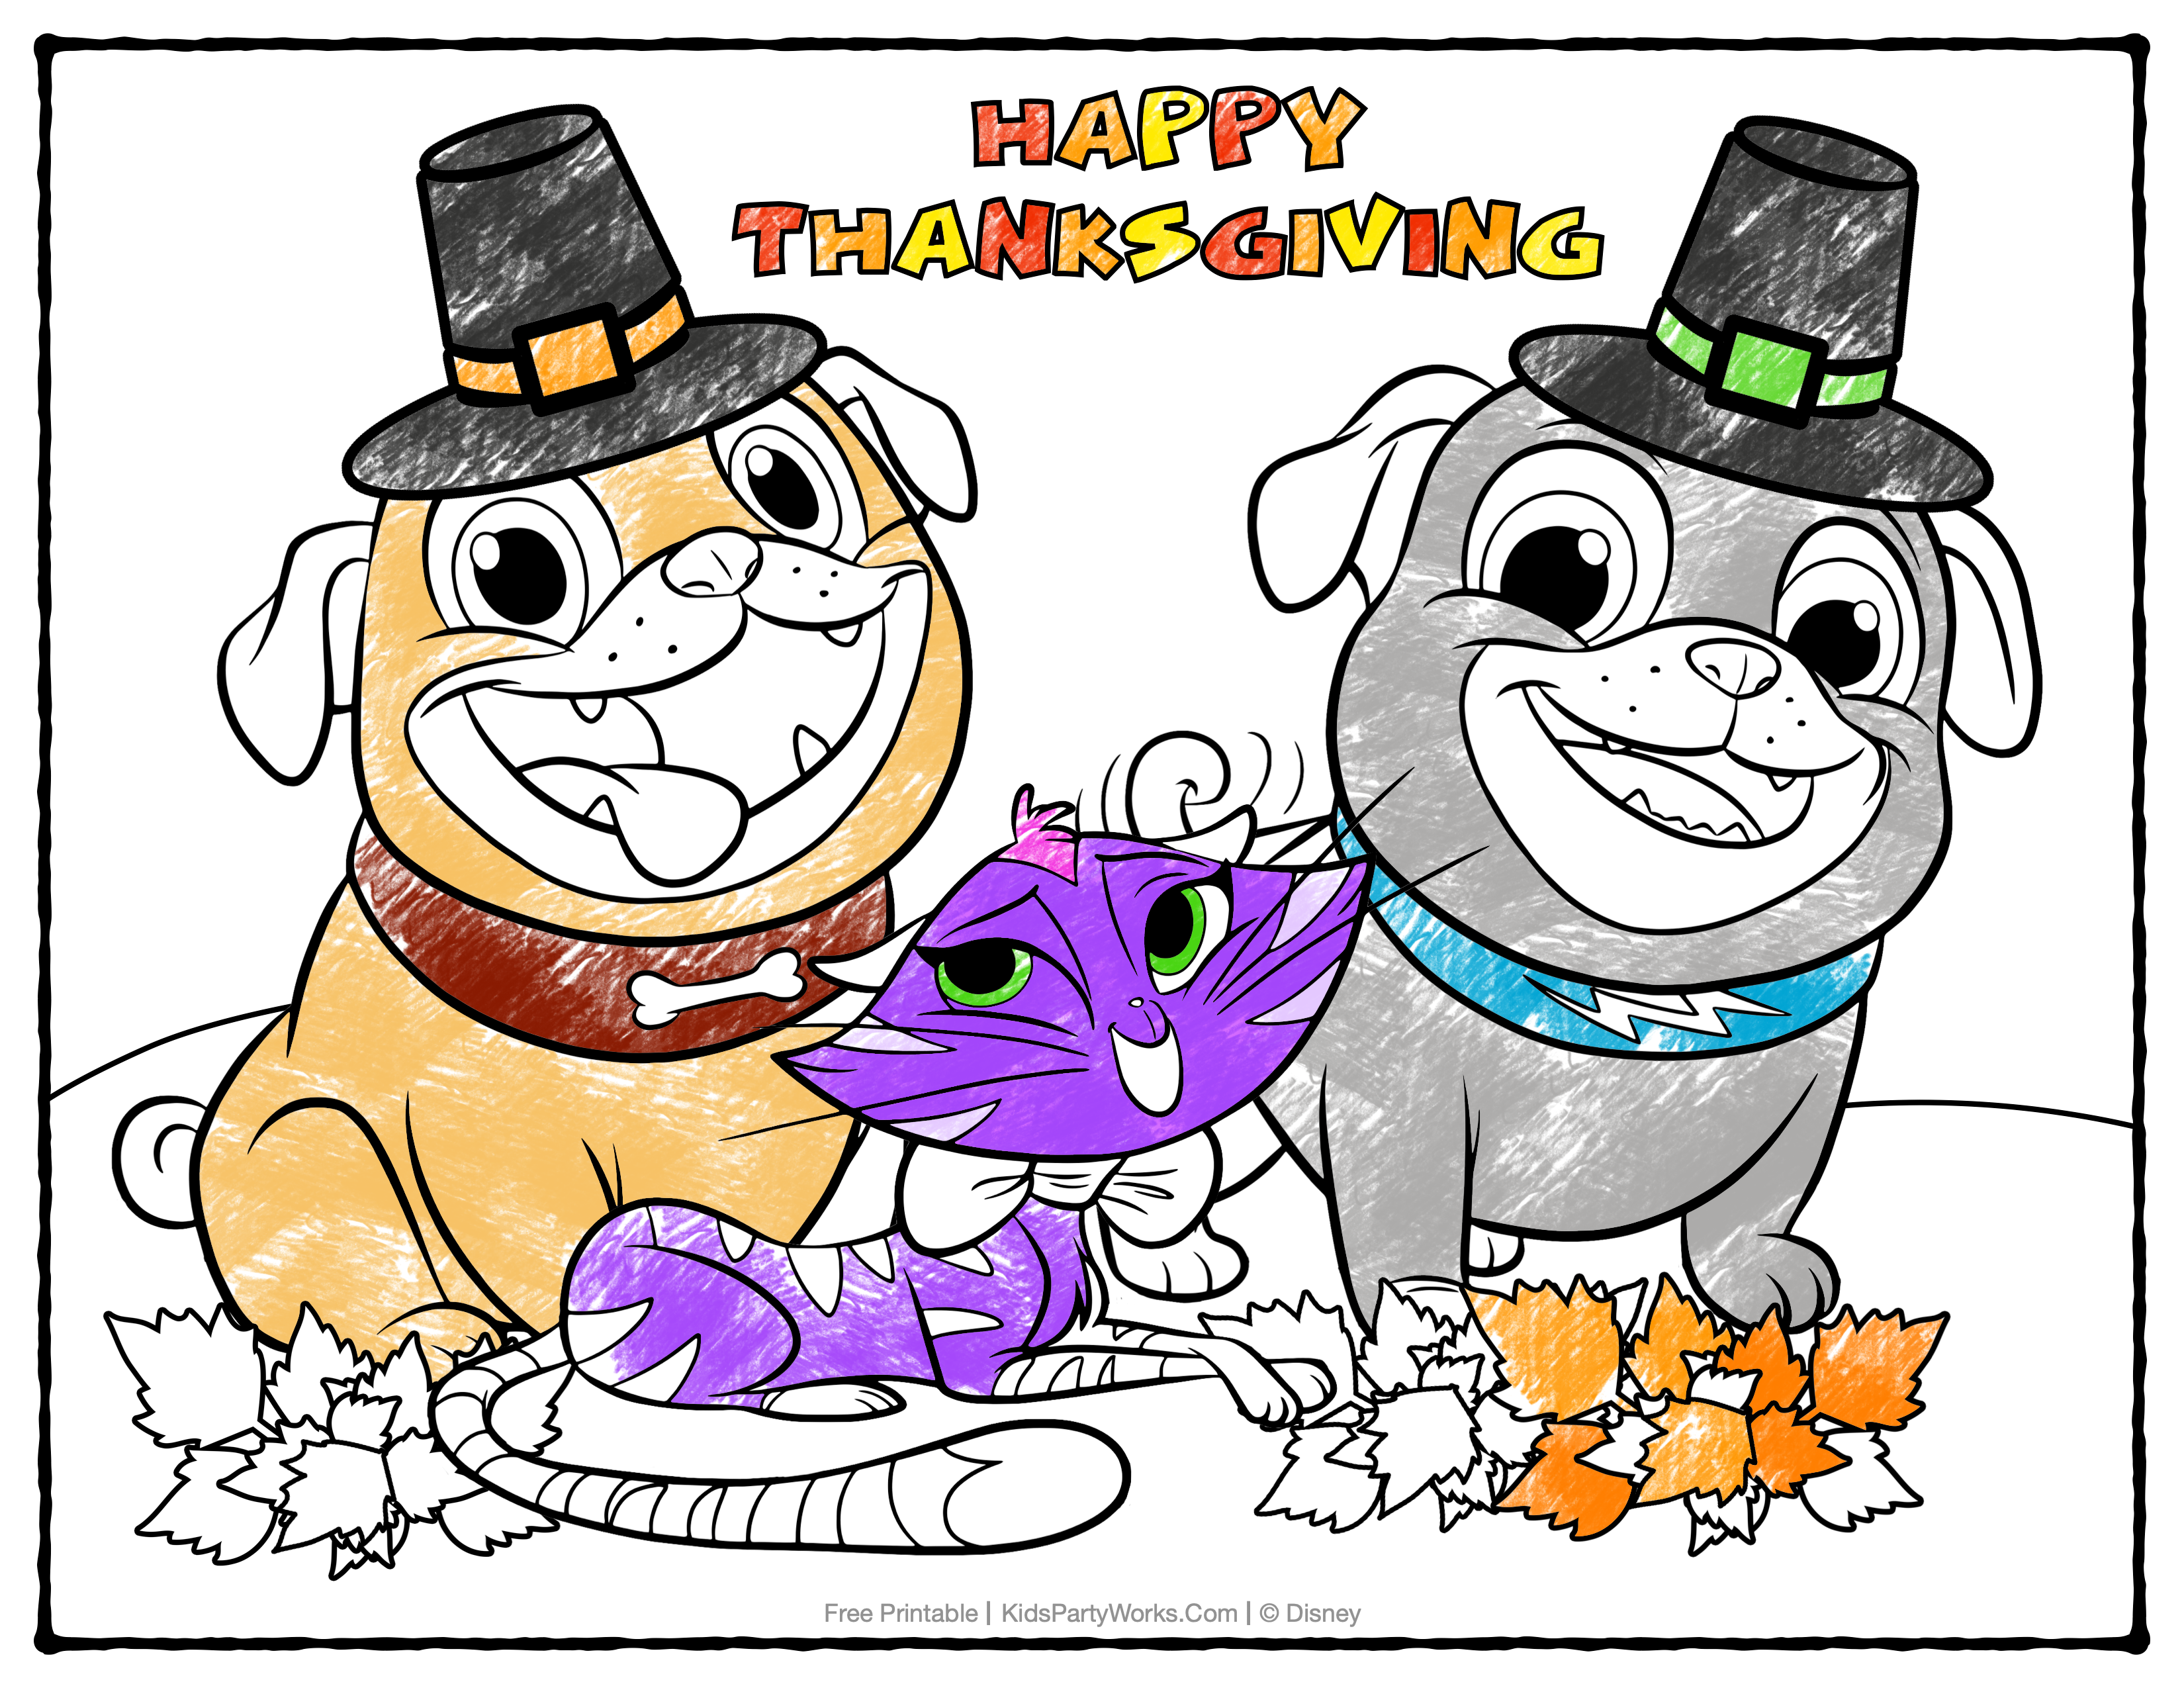 Free Puppy Dog Pals Coloring Page at KidsPartyWorks.Com